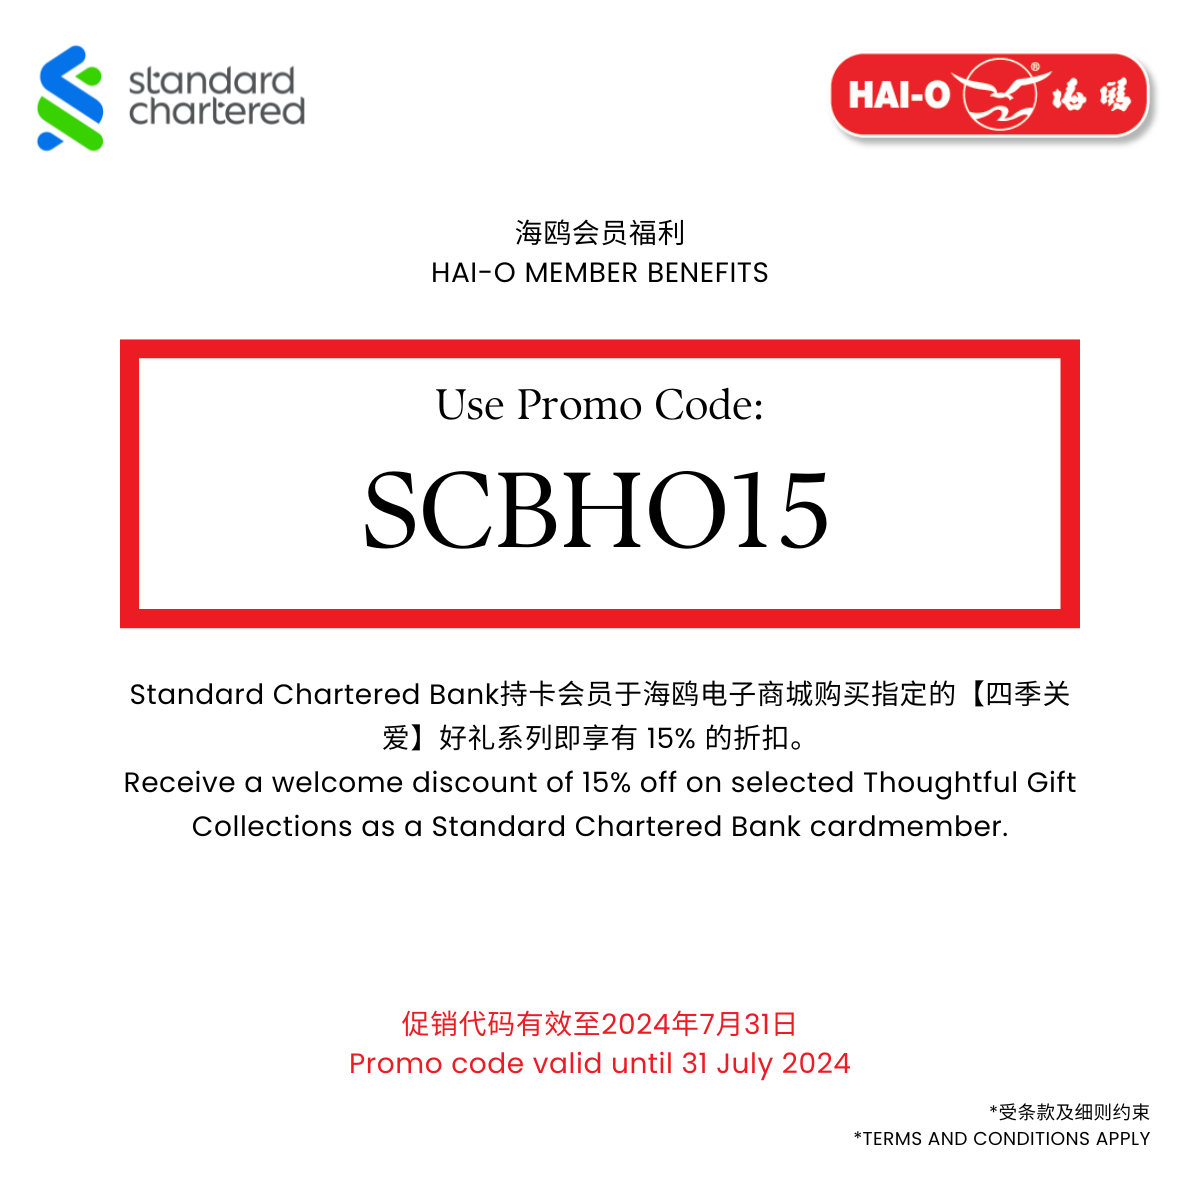 STANDARD CHARTERED BANK CARDMEMBERS: 15% OFF ON SELECTED THOUGHTFUL GIFT COLLECTIONS